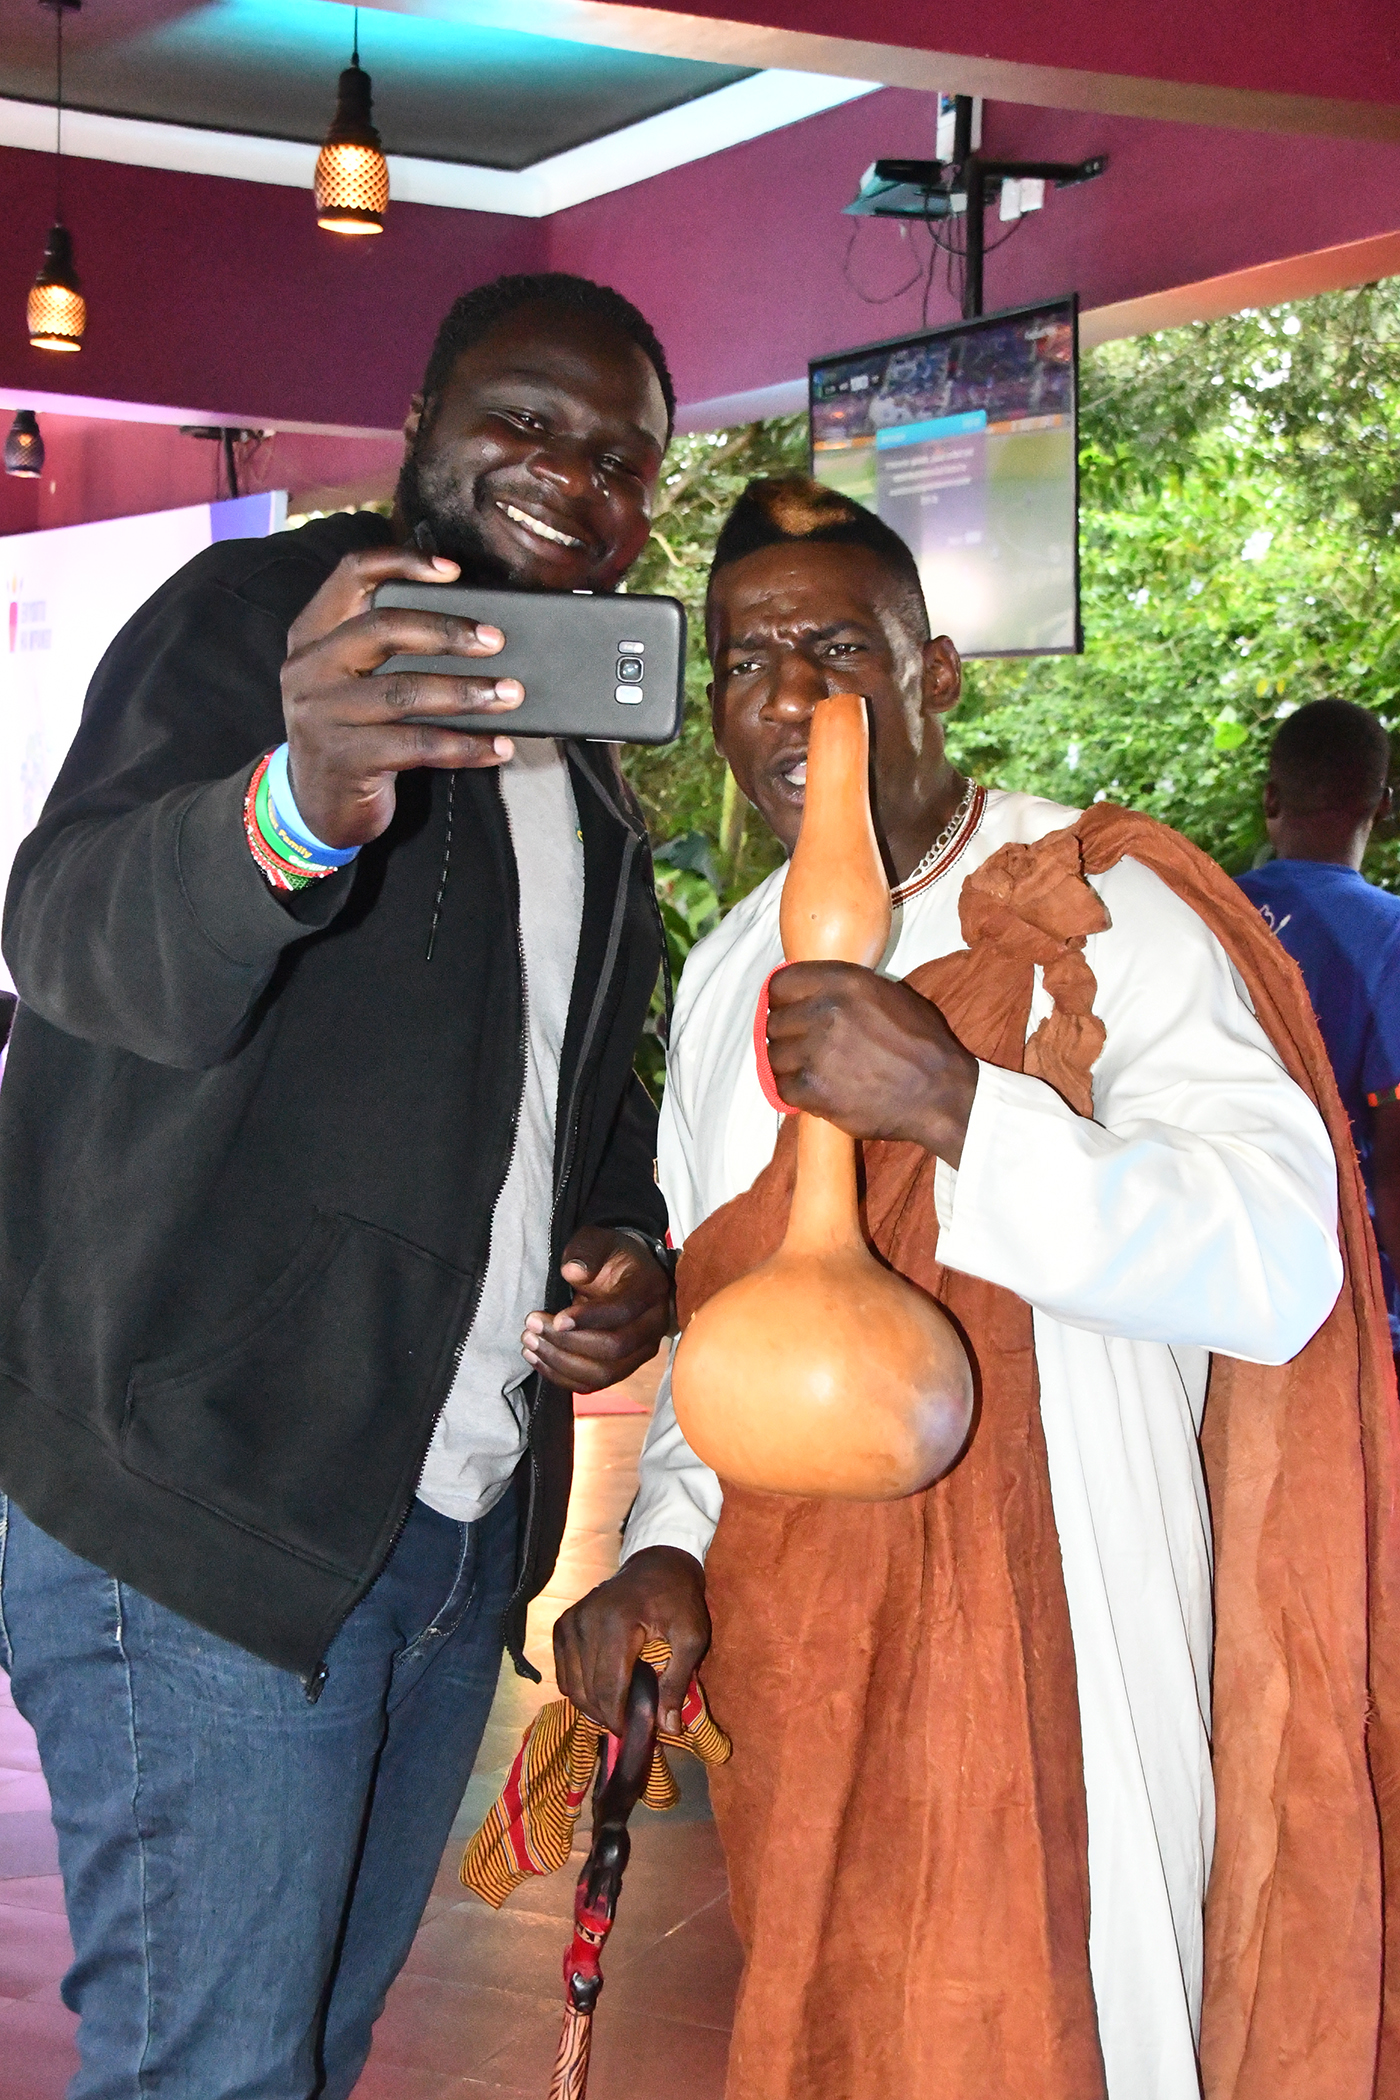 Kick boxer Golola Moses of Uganda takes a selfie with a fan during the Ekyooto Ha Mpango Cultural Festival in Fort Portal Tourism City. Photo by EDGAR R. BATTE